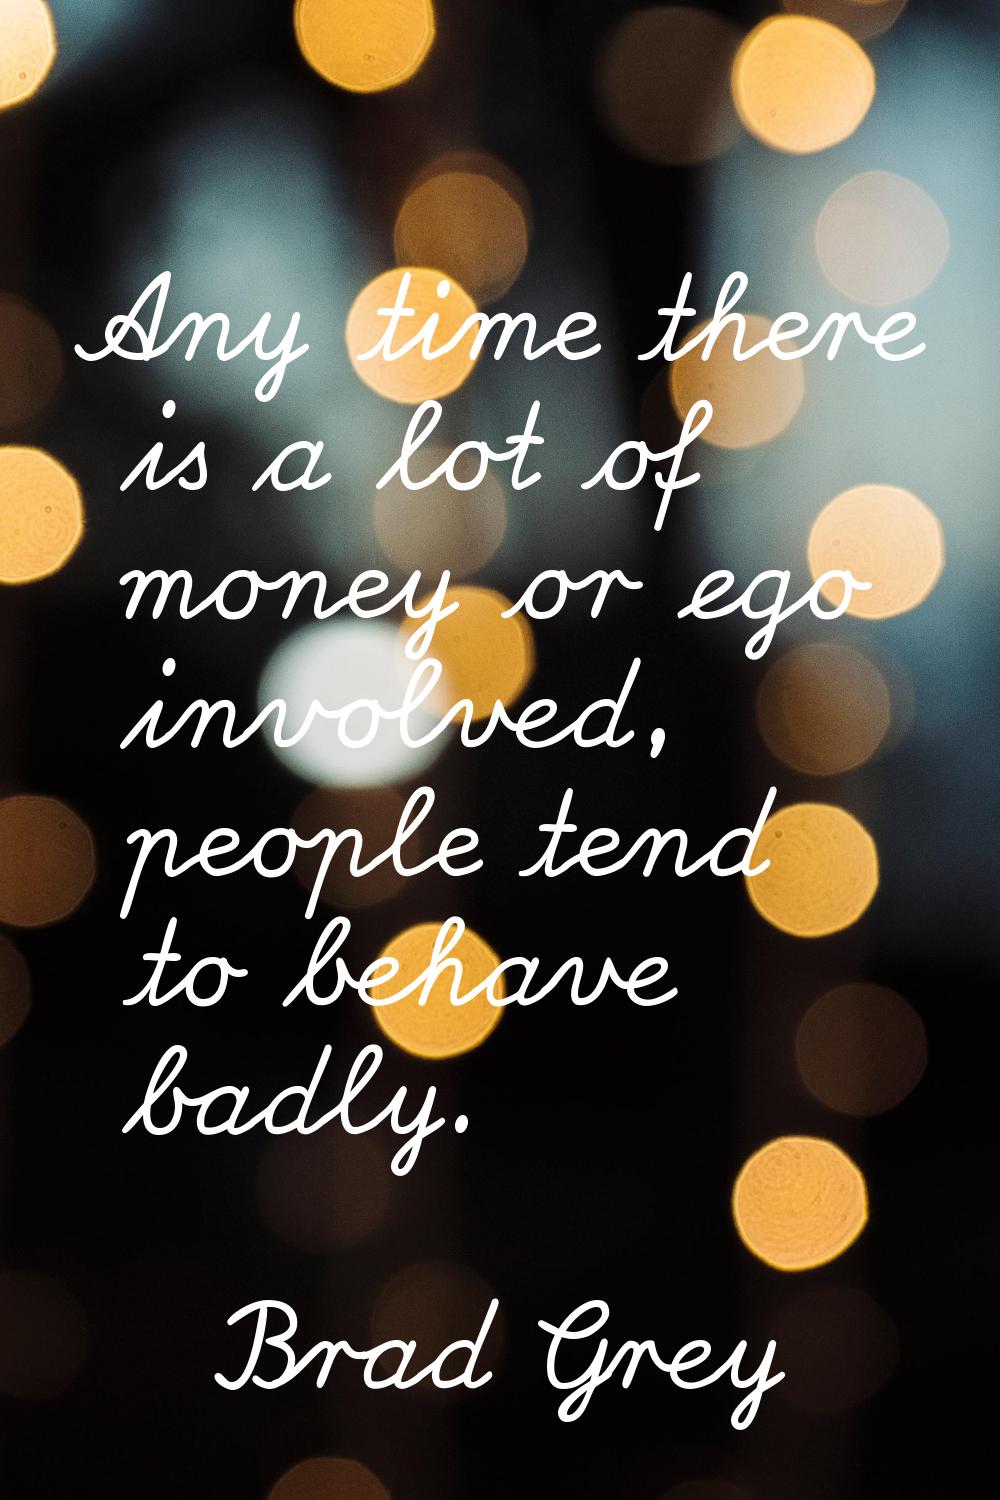 Any time there is a lot of money or ego involved, people tend to behave badly.